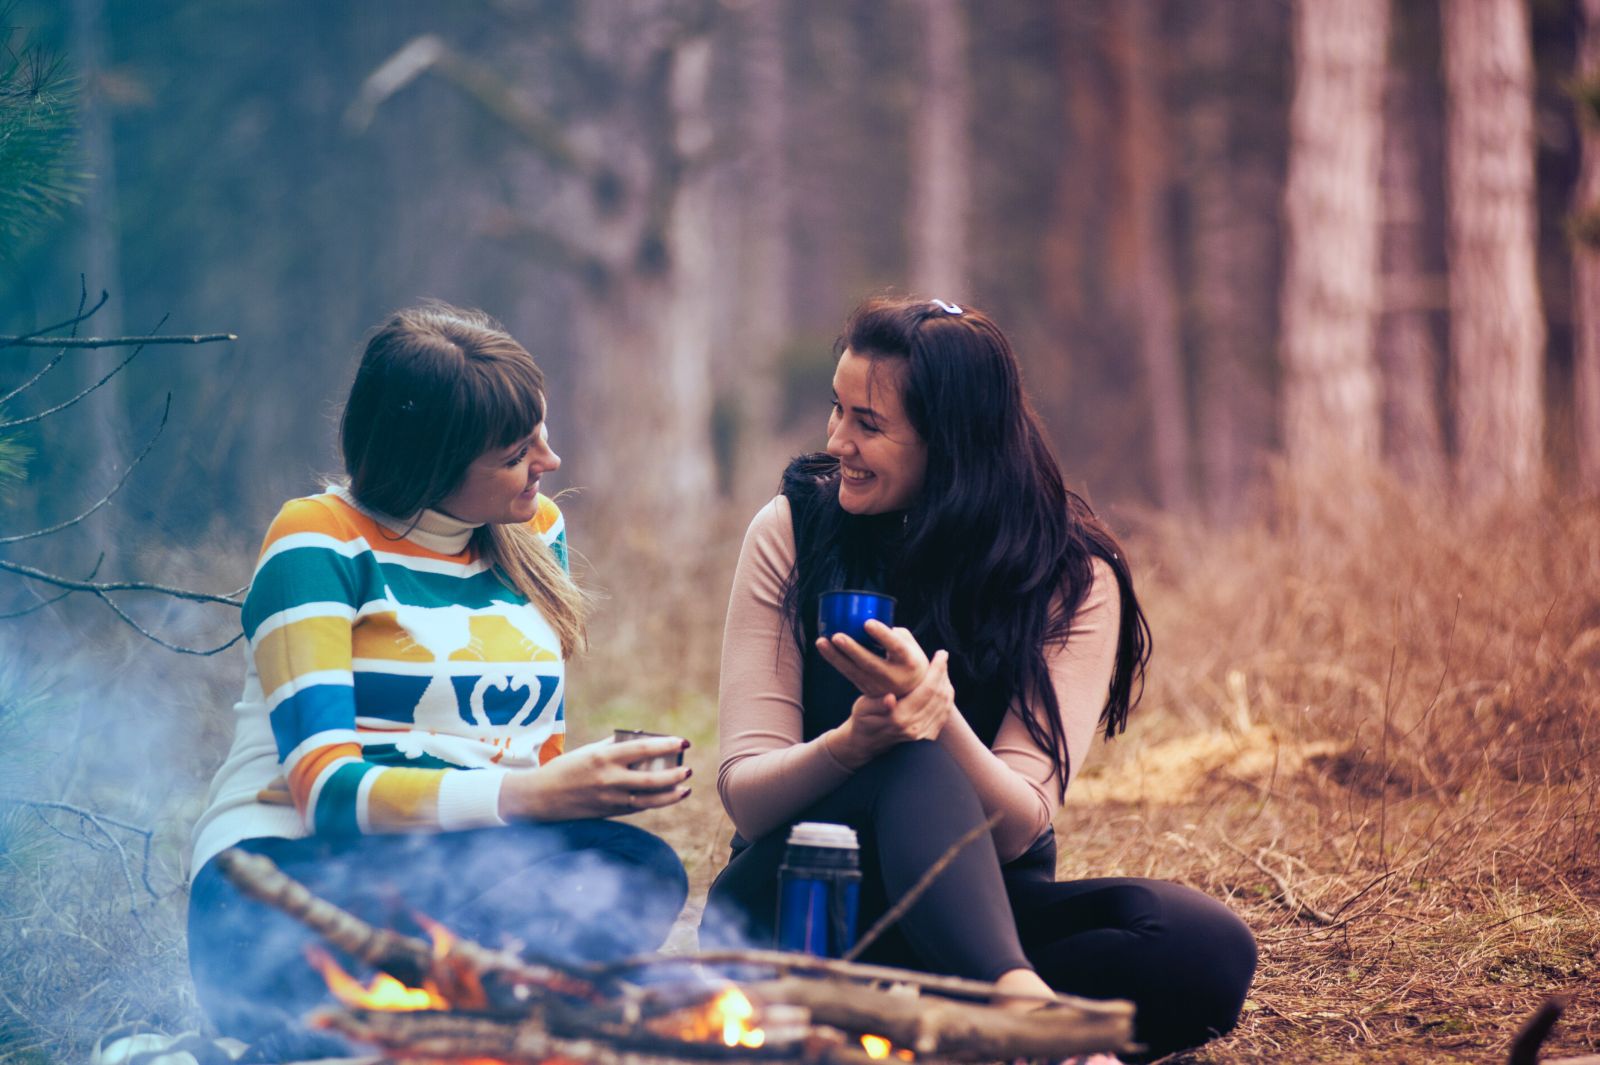 Two young adults chatting in the outdoors by a fire